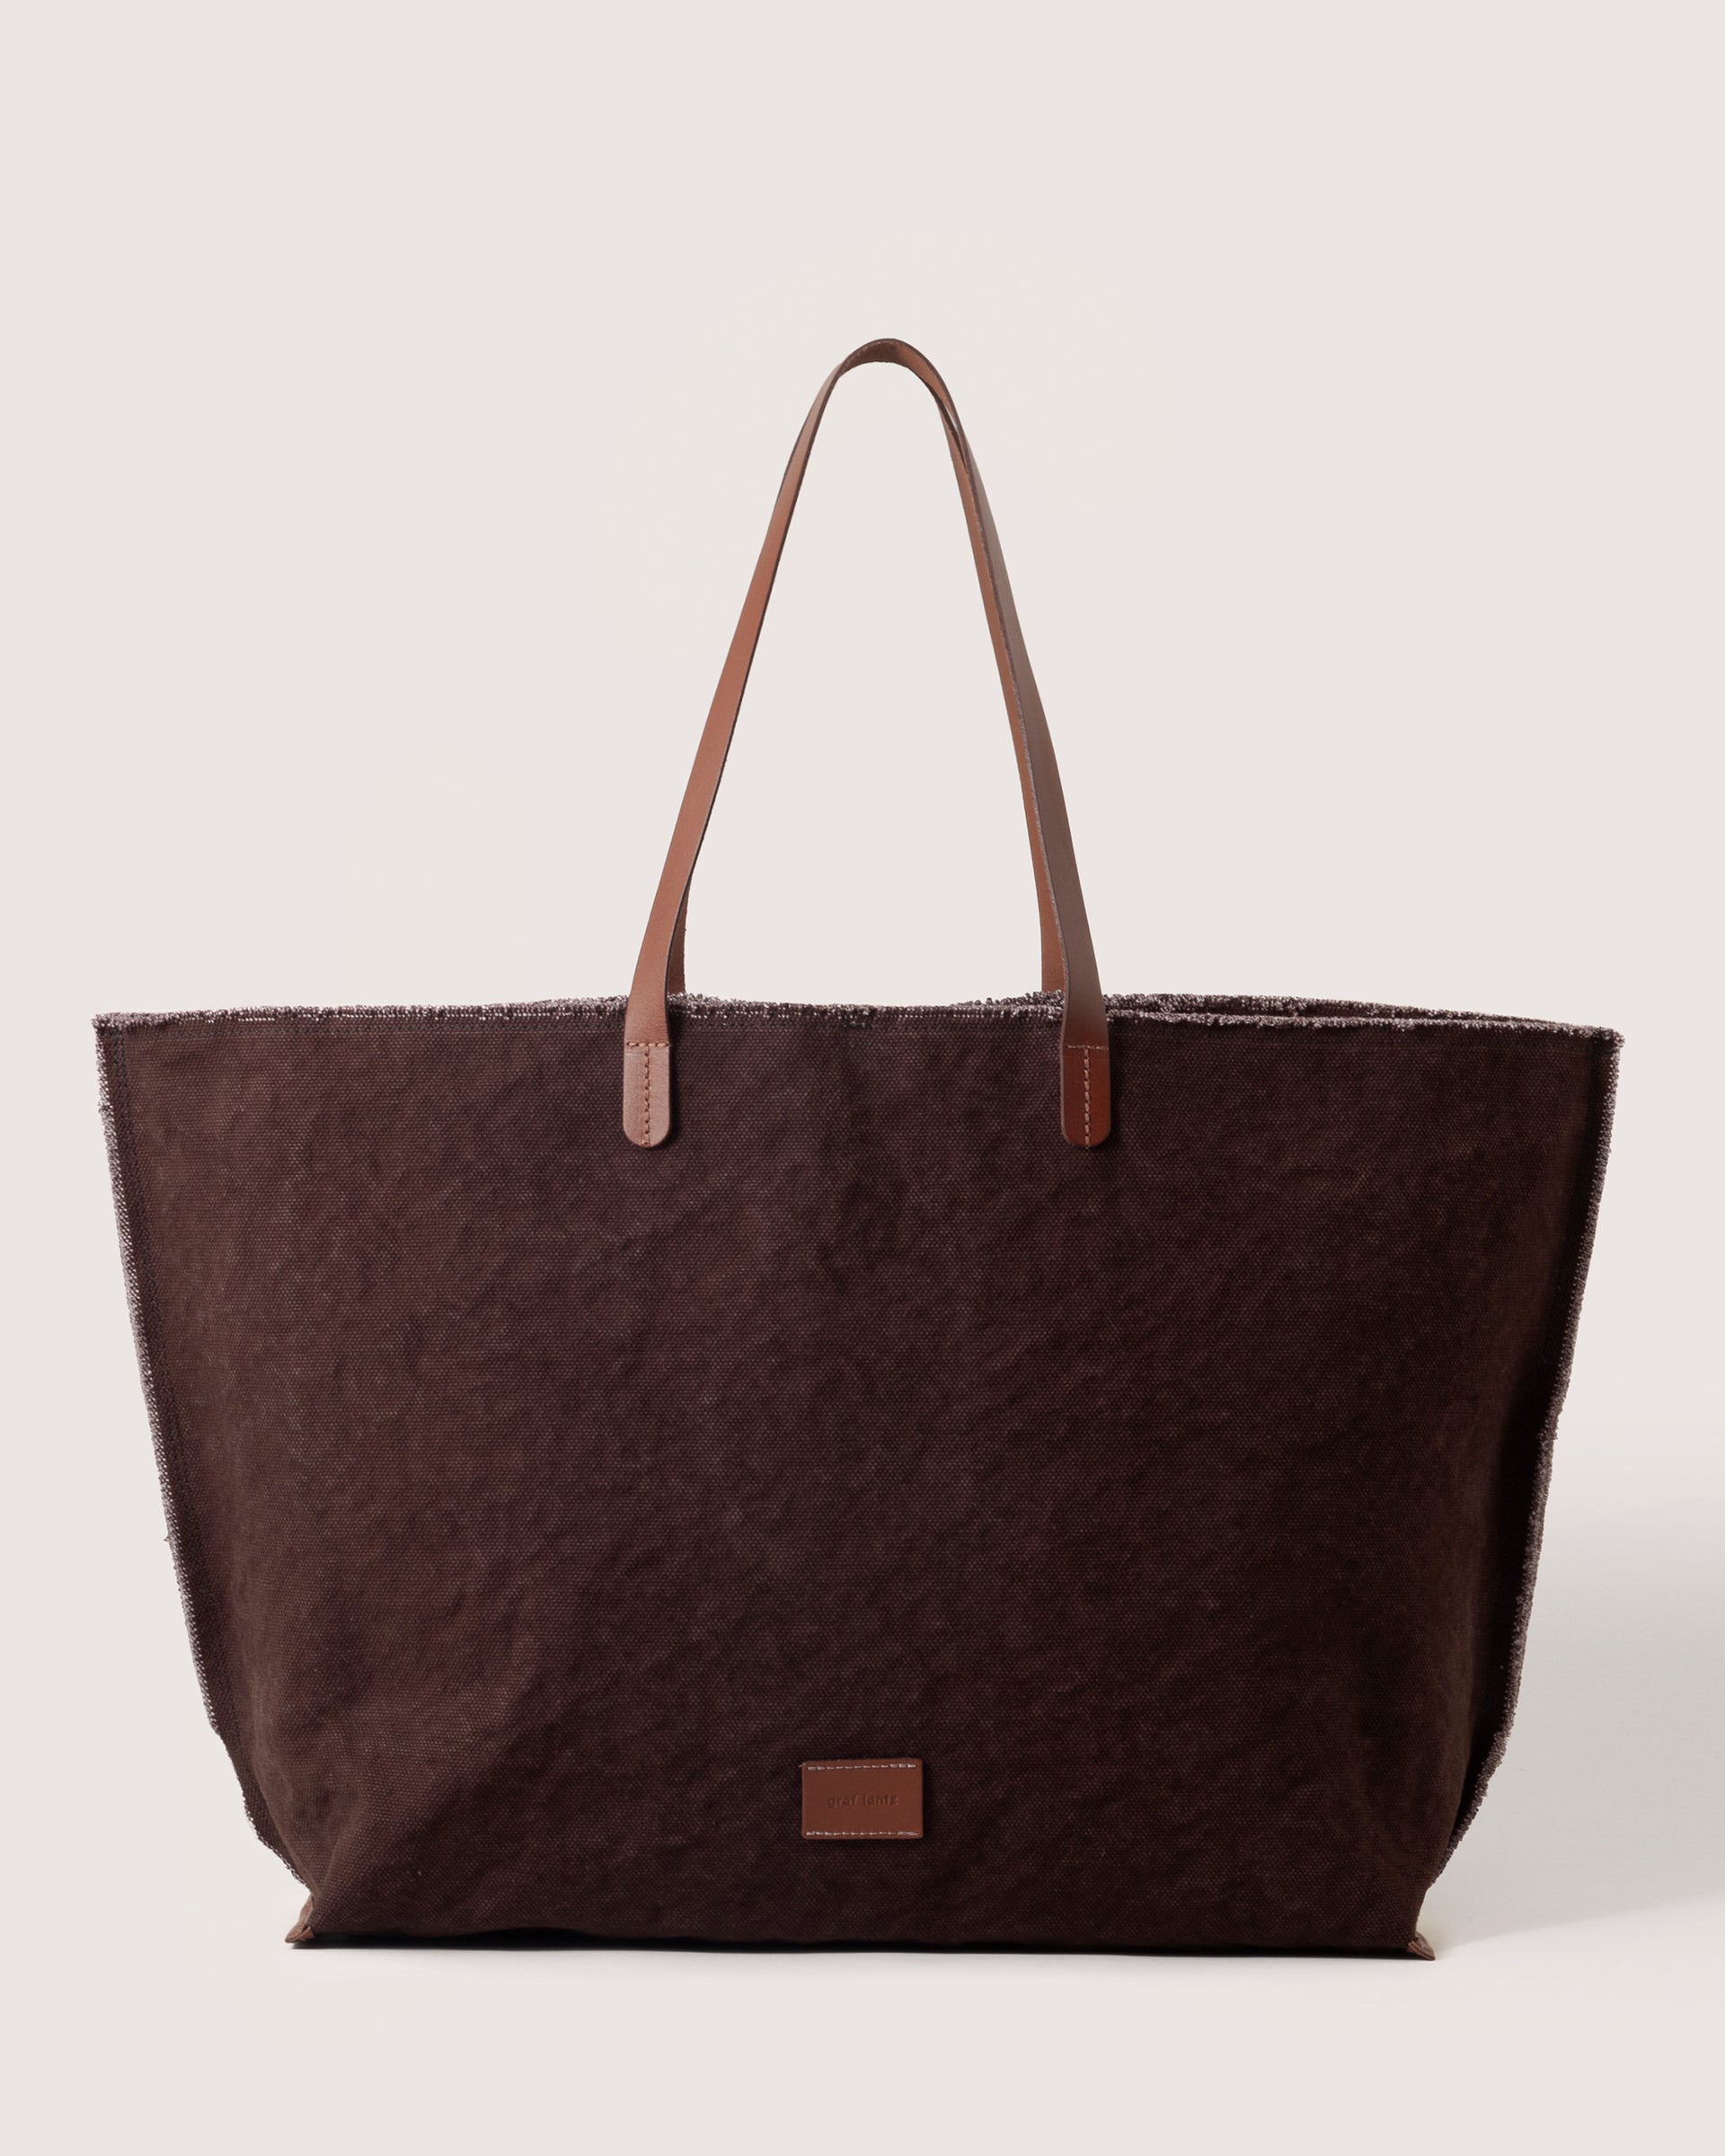 A Hana Canvas Boat Bag in Deep Brown Sienna with dark brown leather handle, white background